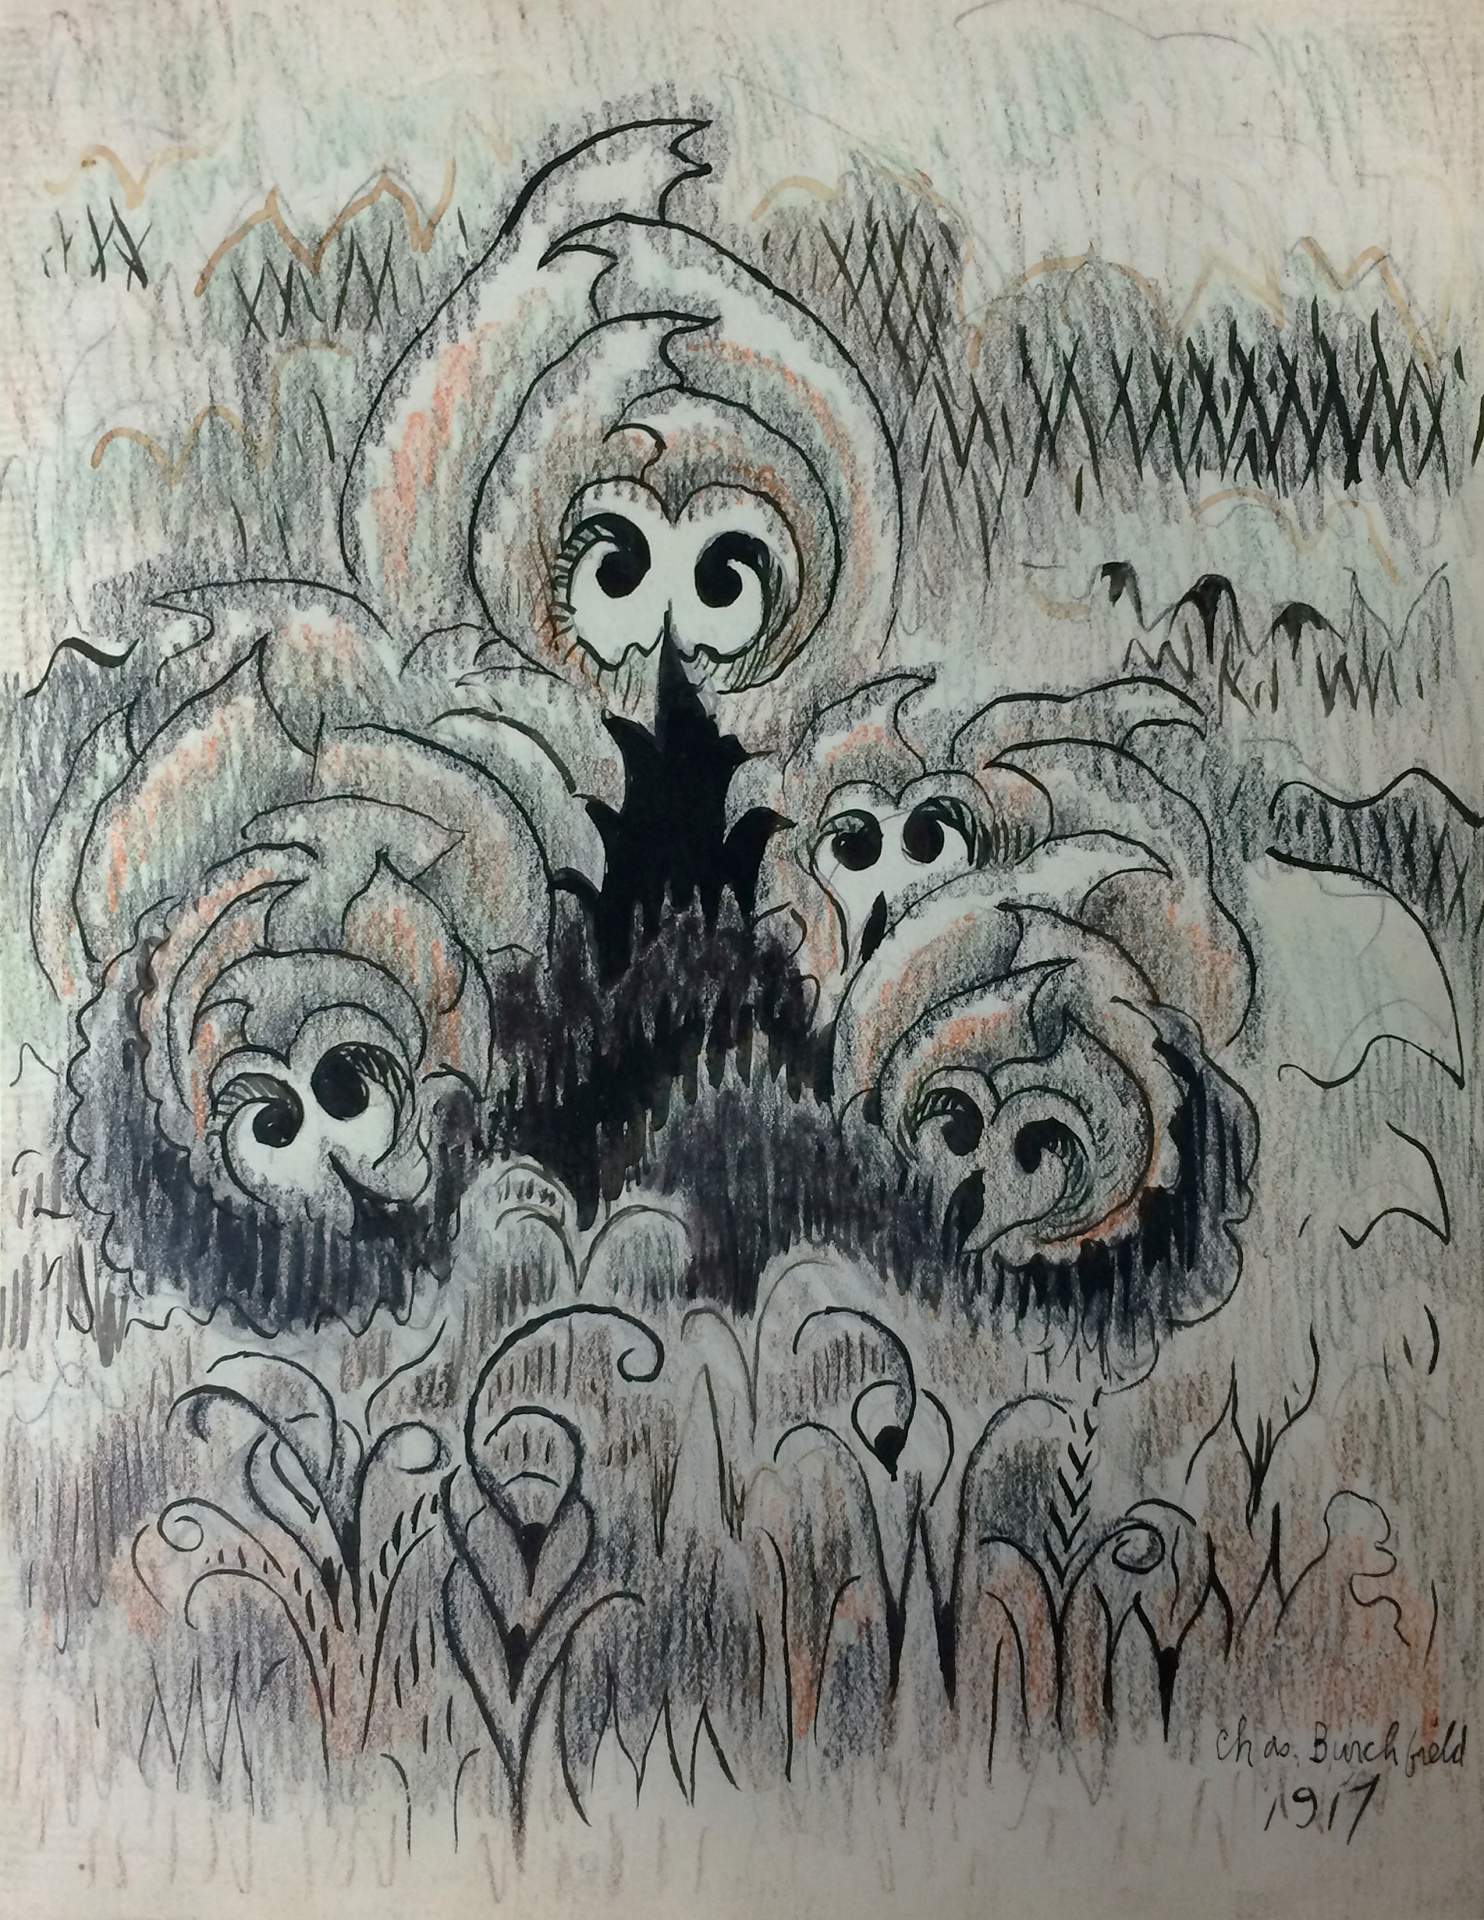 Works by Charles Burchfield: Permanent and Loan Collections Exhibition